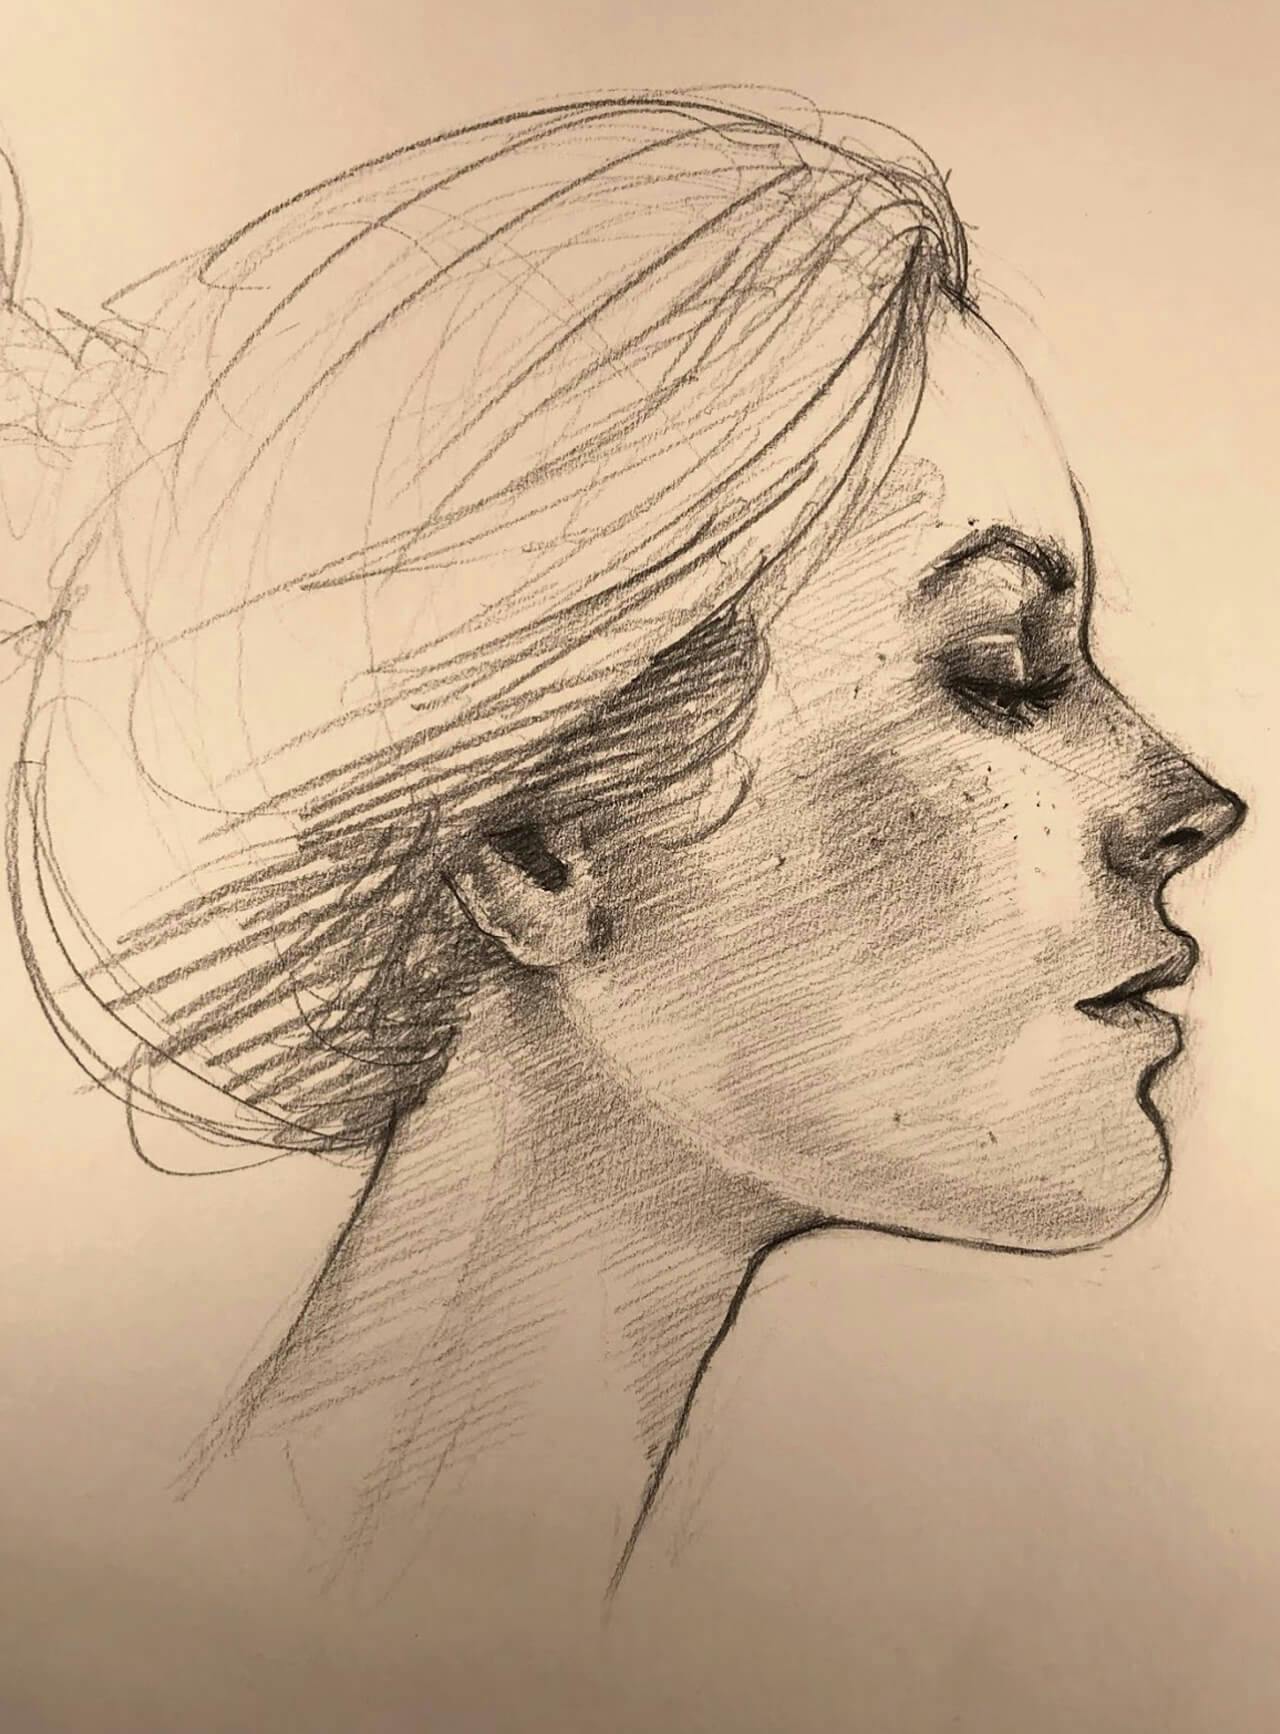 Graphite drawing, woman's face in profile with her hair up